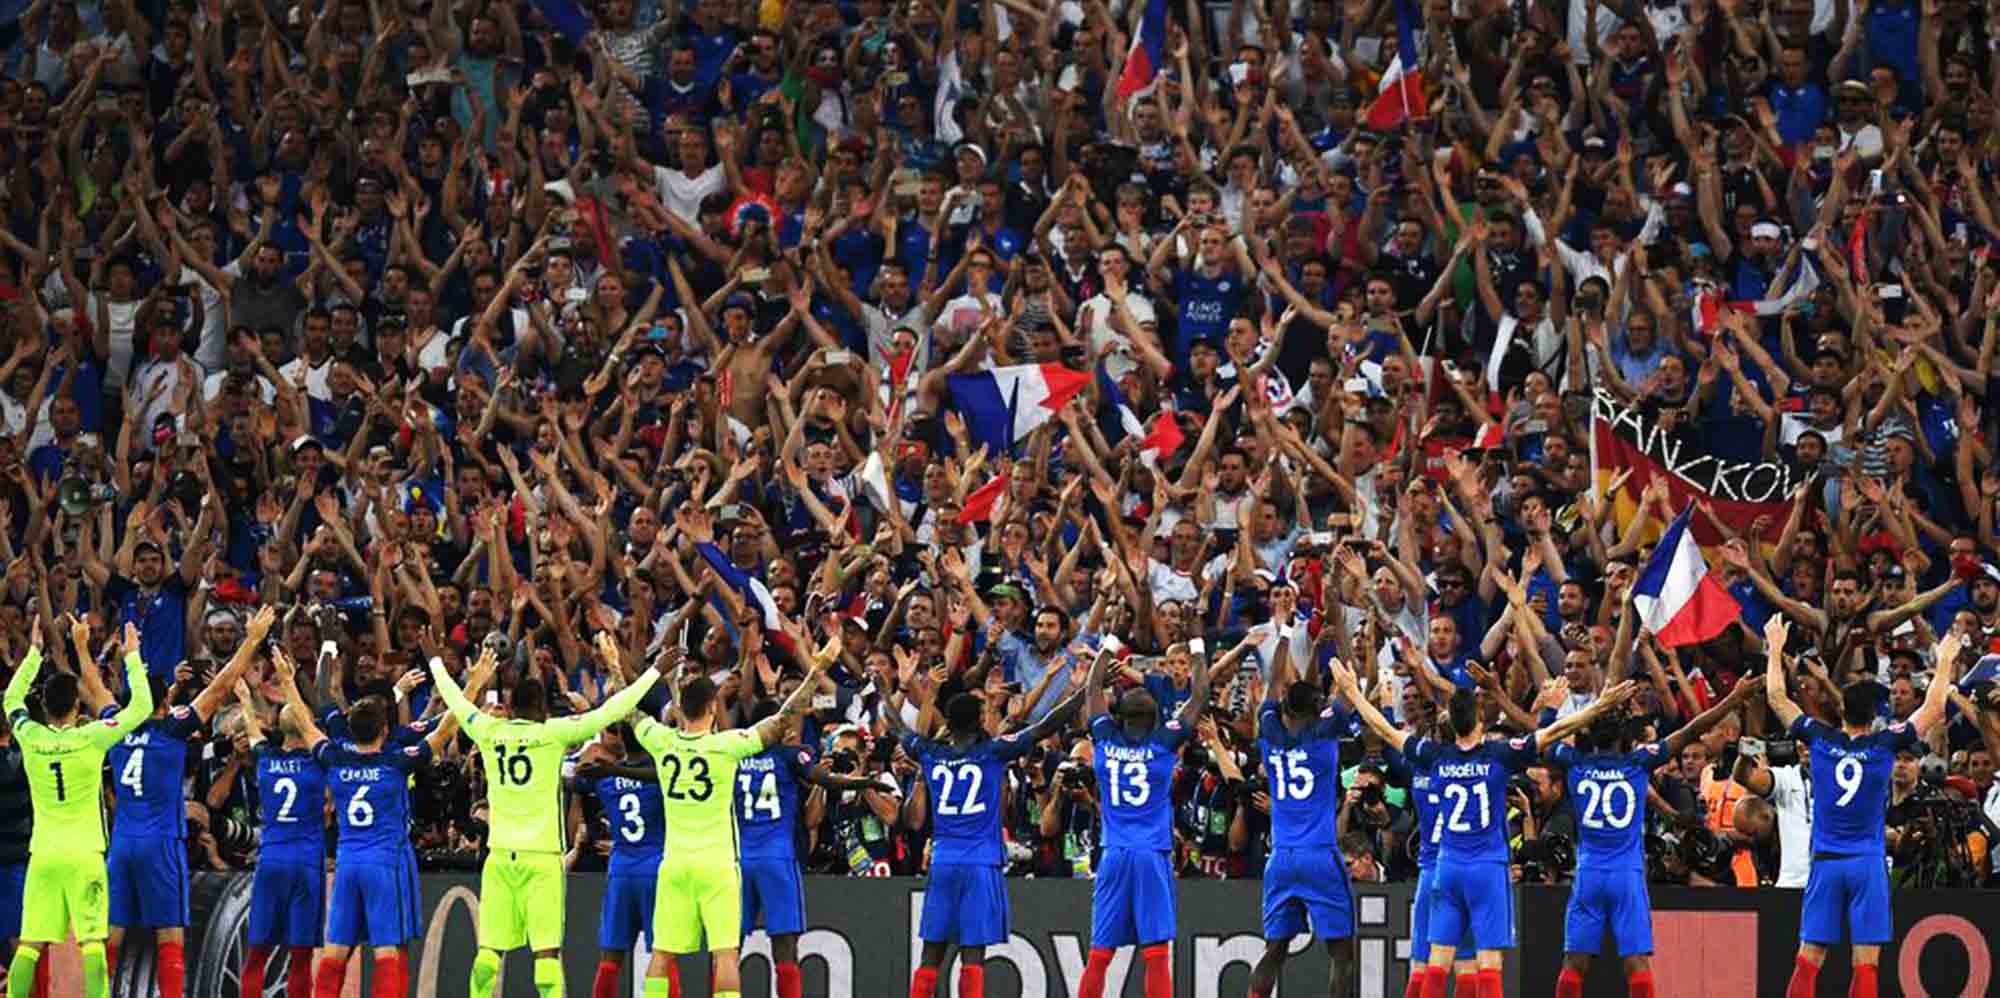 France players acknowledge the fans after beating Germany 2-0 in the Euro 2016 semi-final football match between Germany and France at the Stade Velodrome in Marseille on July 7, 2016. France will face Portugal in the finals on July 10, 2016. / AFP / PATRIK STOLLARZ (Photo credit should read PATRIK STOLLARZ/AFP/Getty Images)